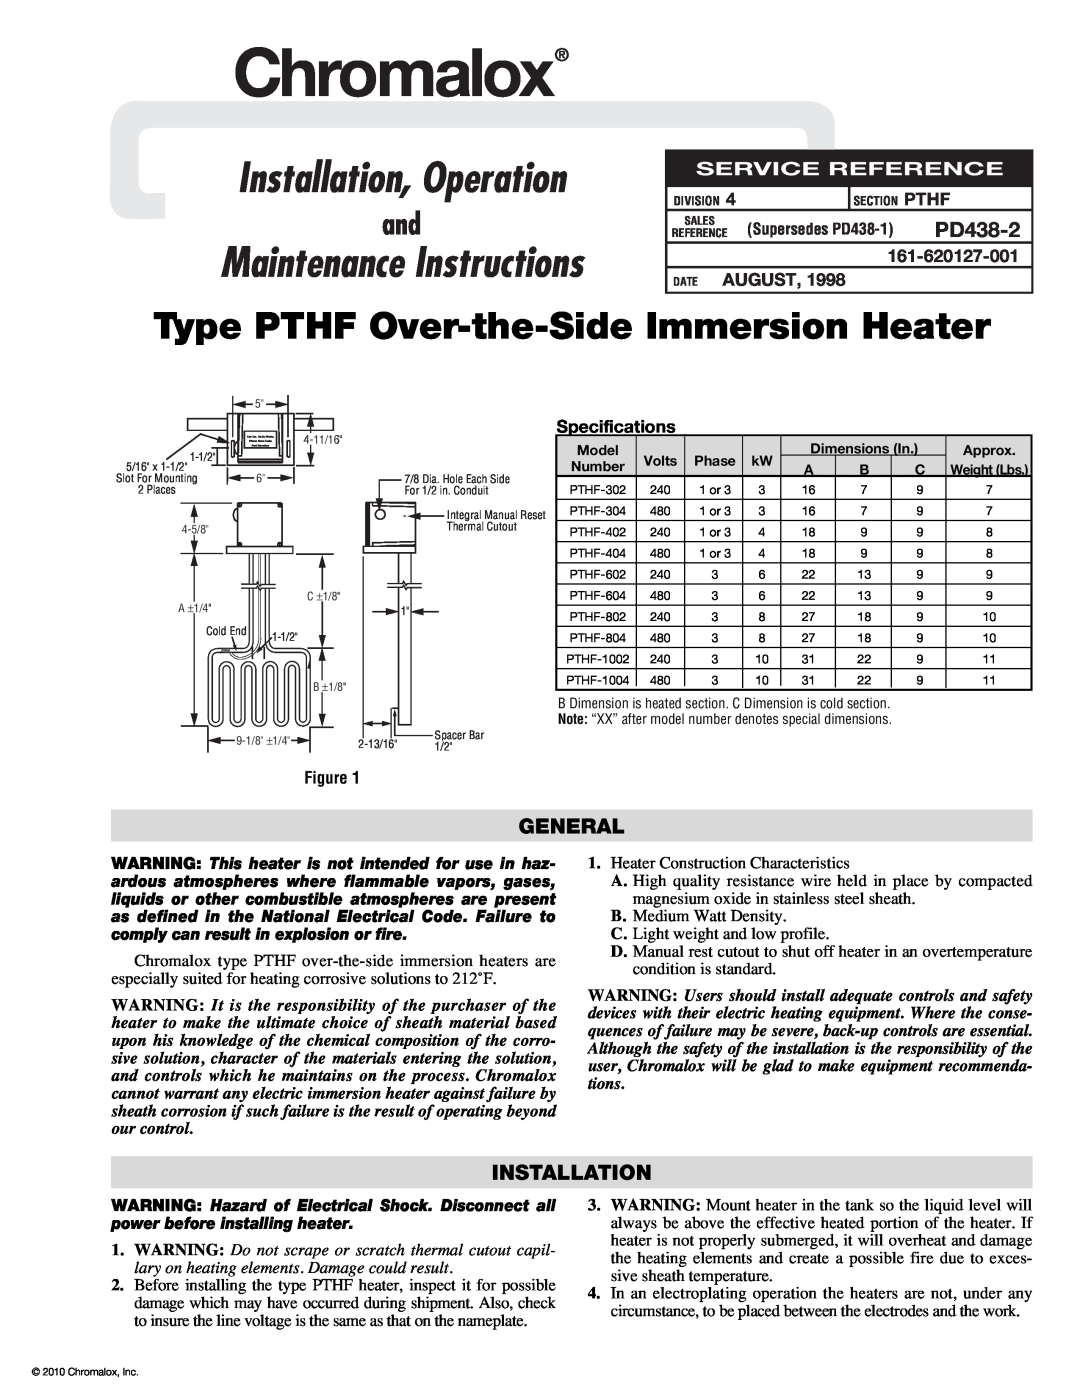 Chromalox PD438-2 specifications General, Chromalox, Installation, Operation, Type PTHF Over-the-SideImmersion Heater 